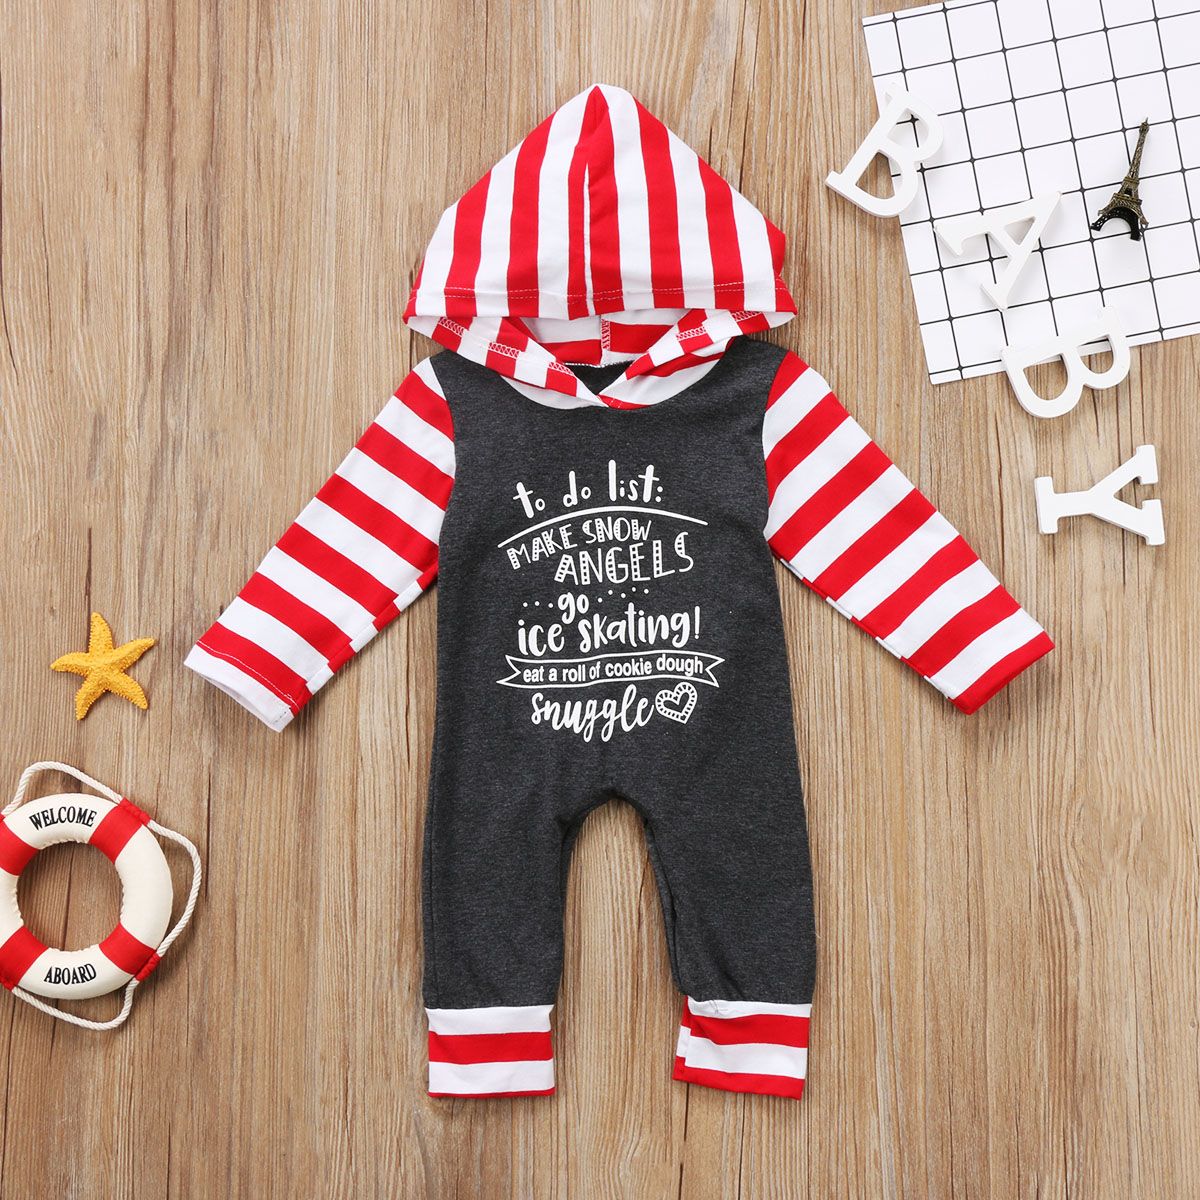 2019 Toddler Kids Baby Letter Boys Girls Hoodie Outfits Clothes Romper Jumpsuit